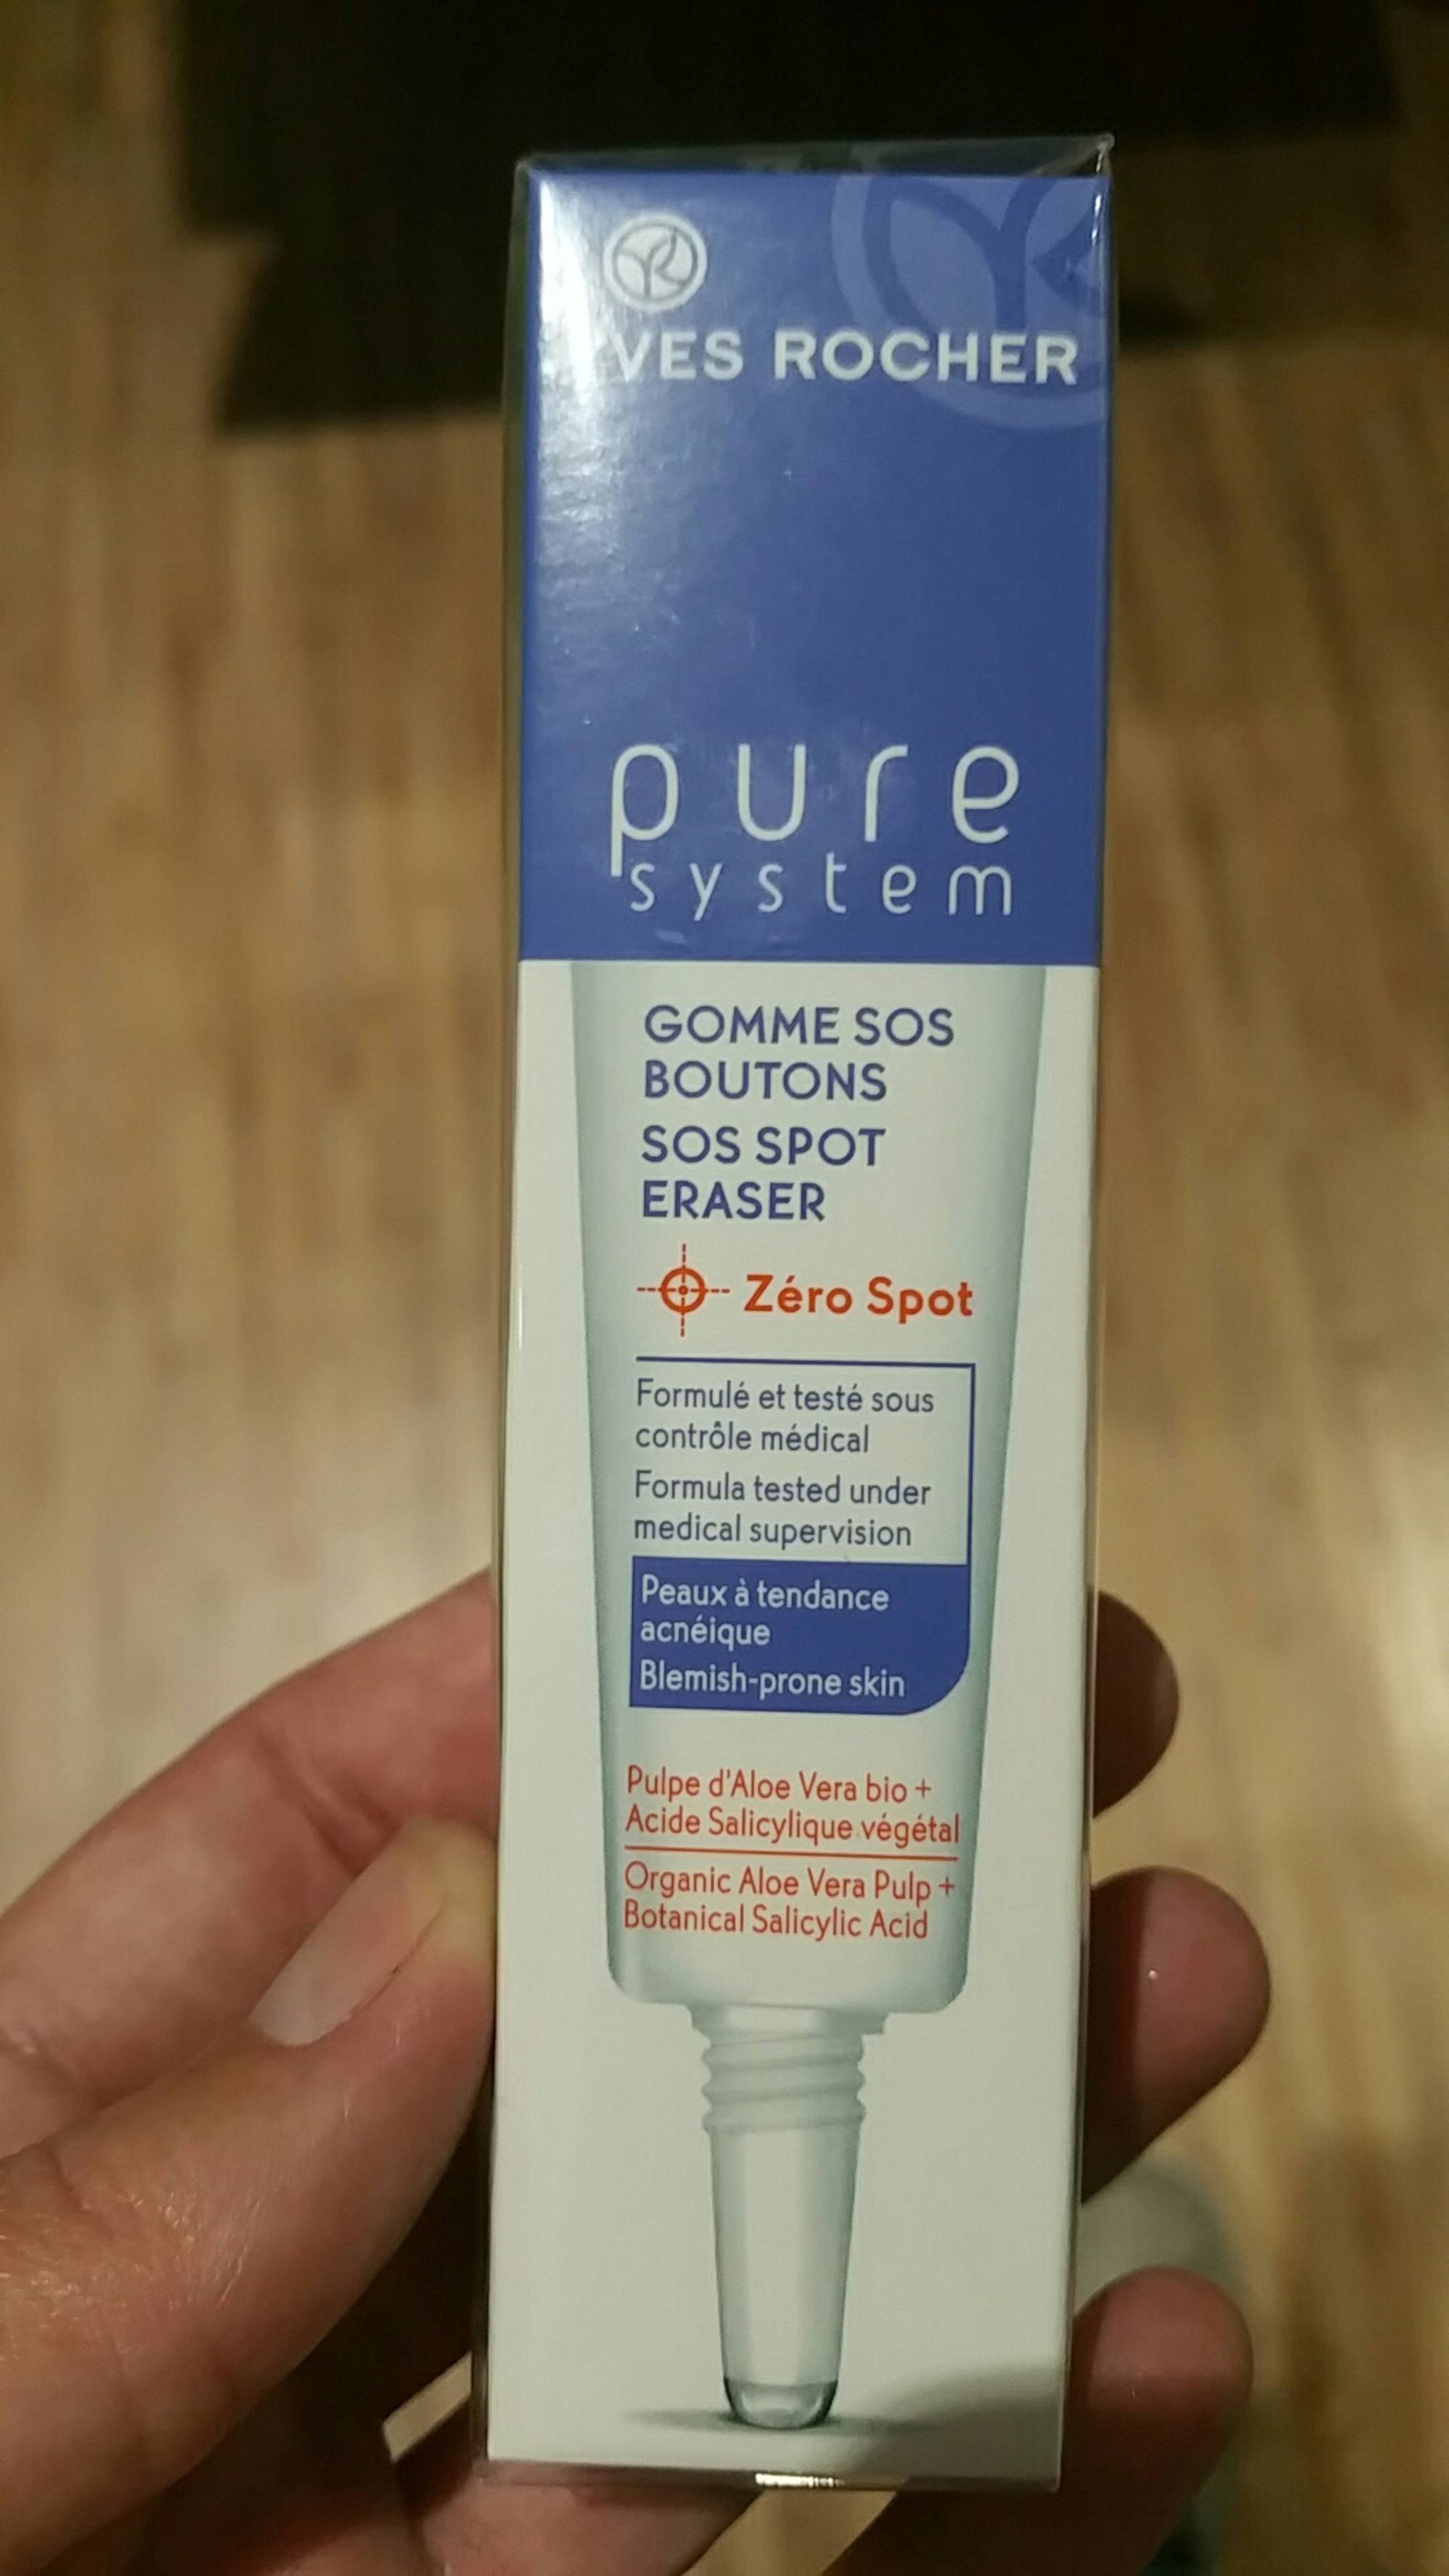 YVES ROCHER - Pure system - Gomme sos boutons